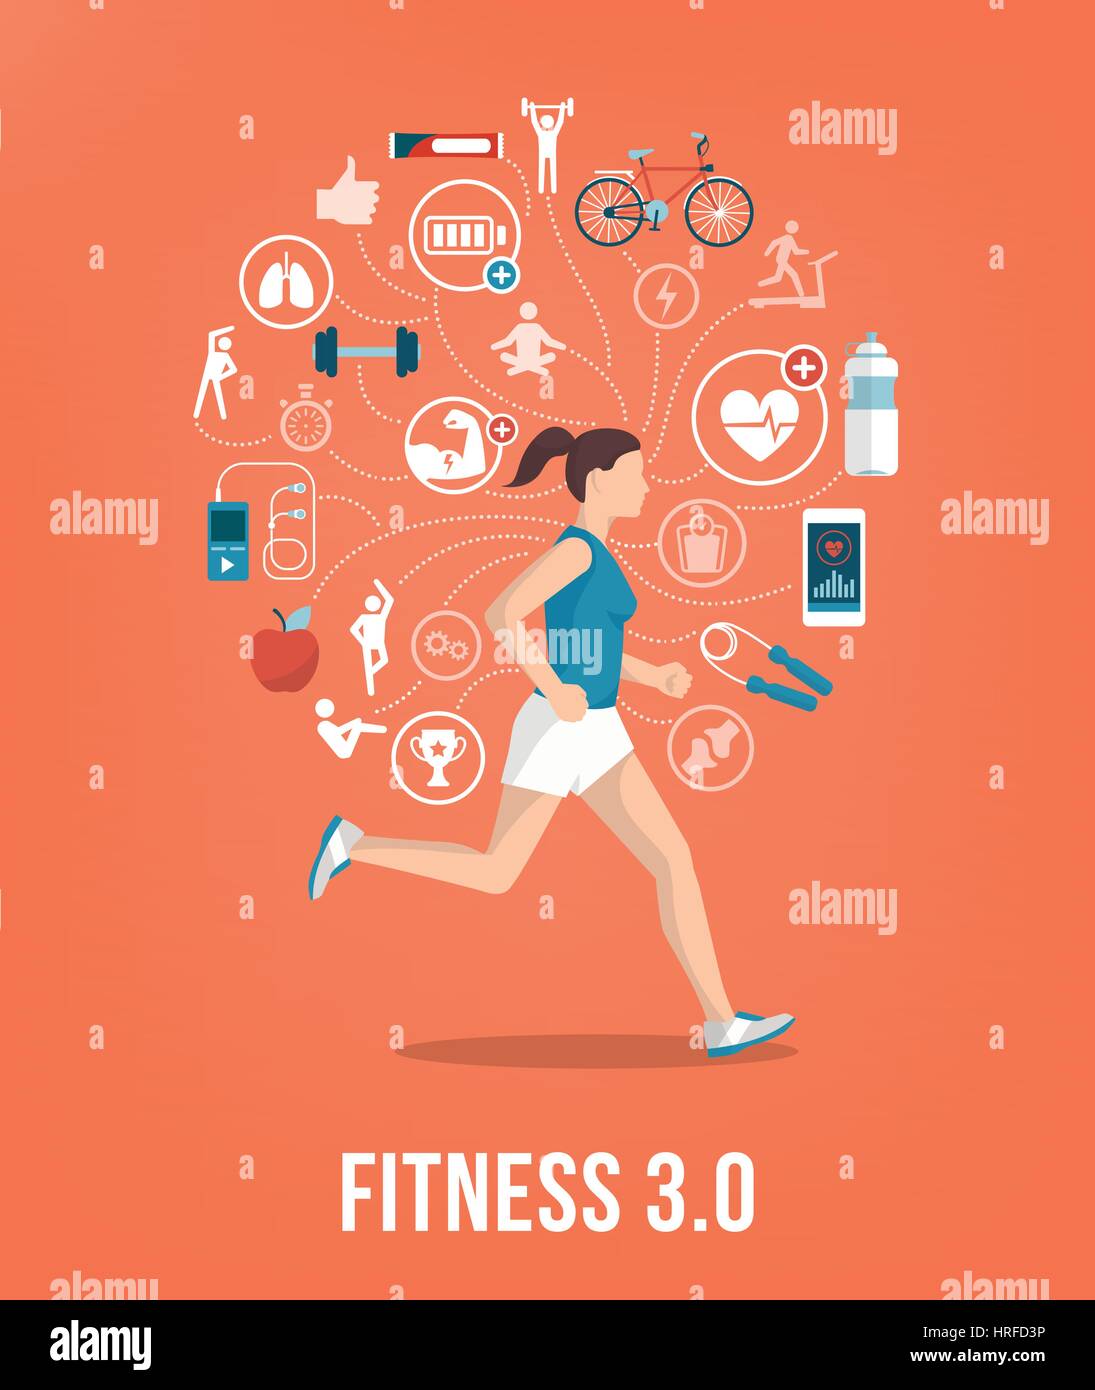 Athletic young woman running surrounded by fitness concepts and icons Stock Vector